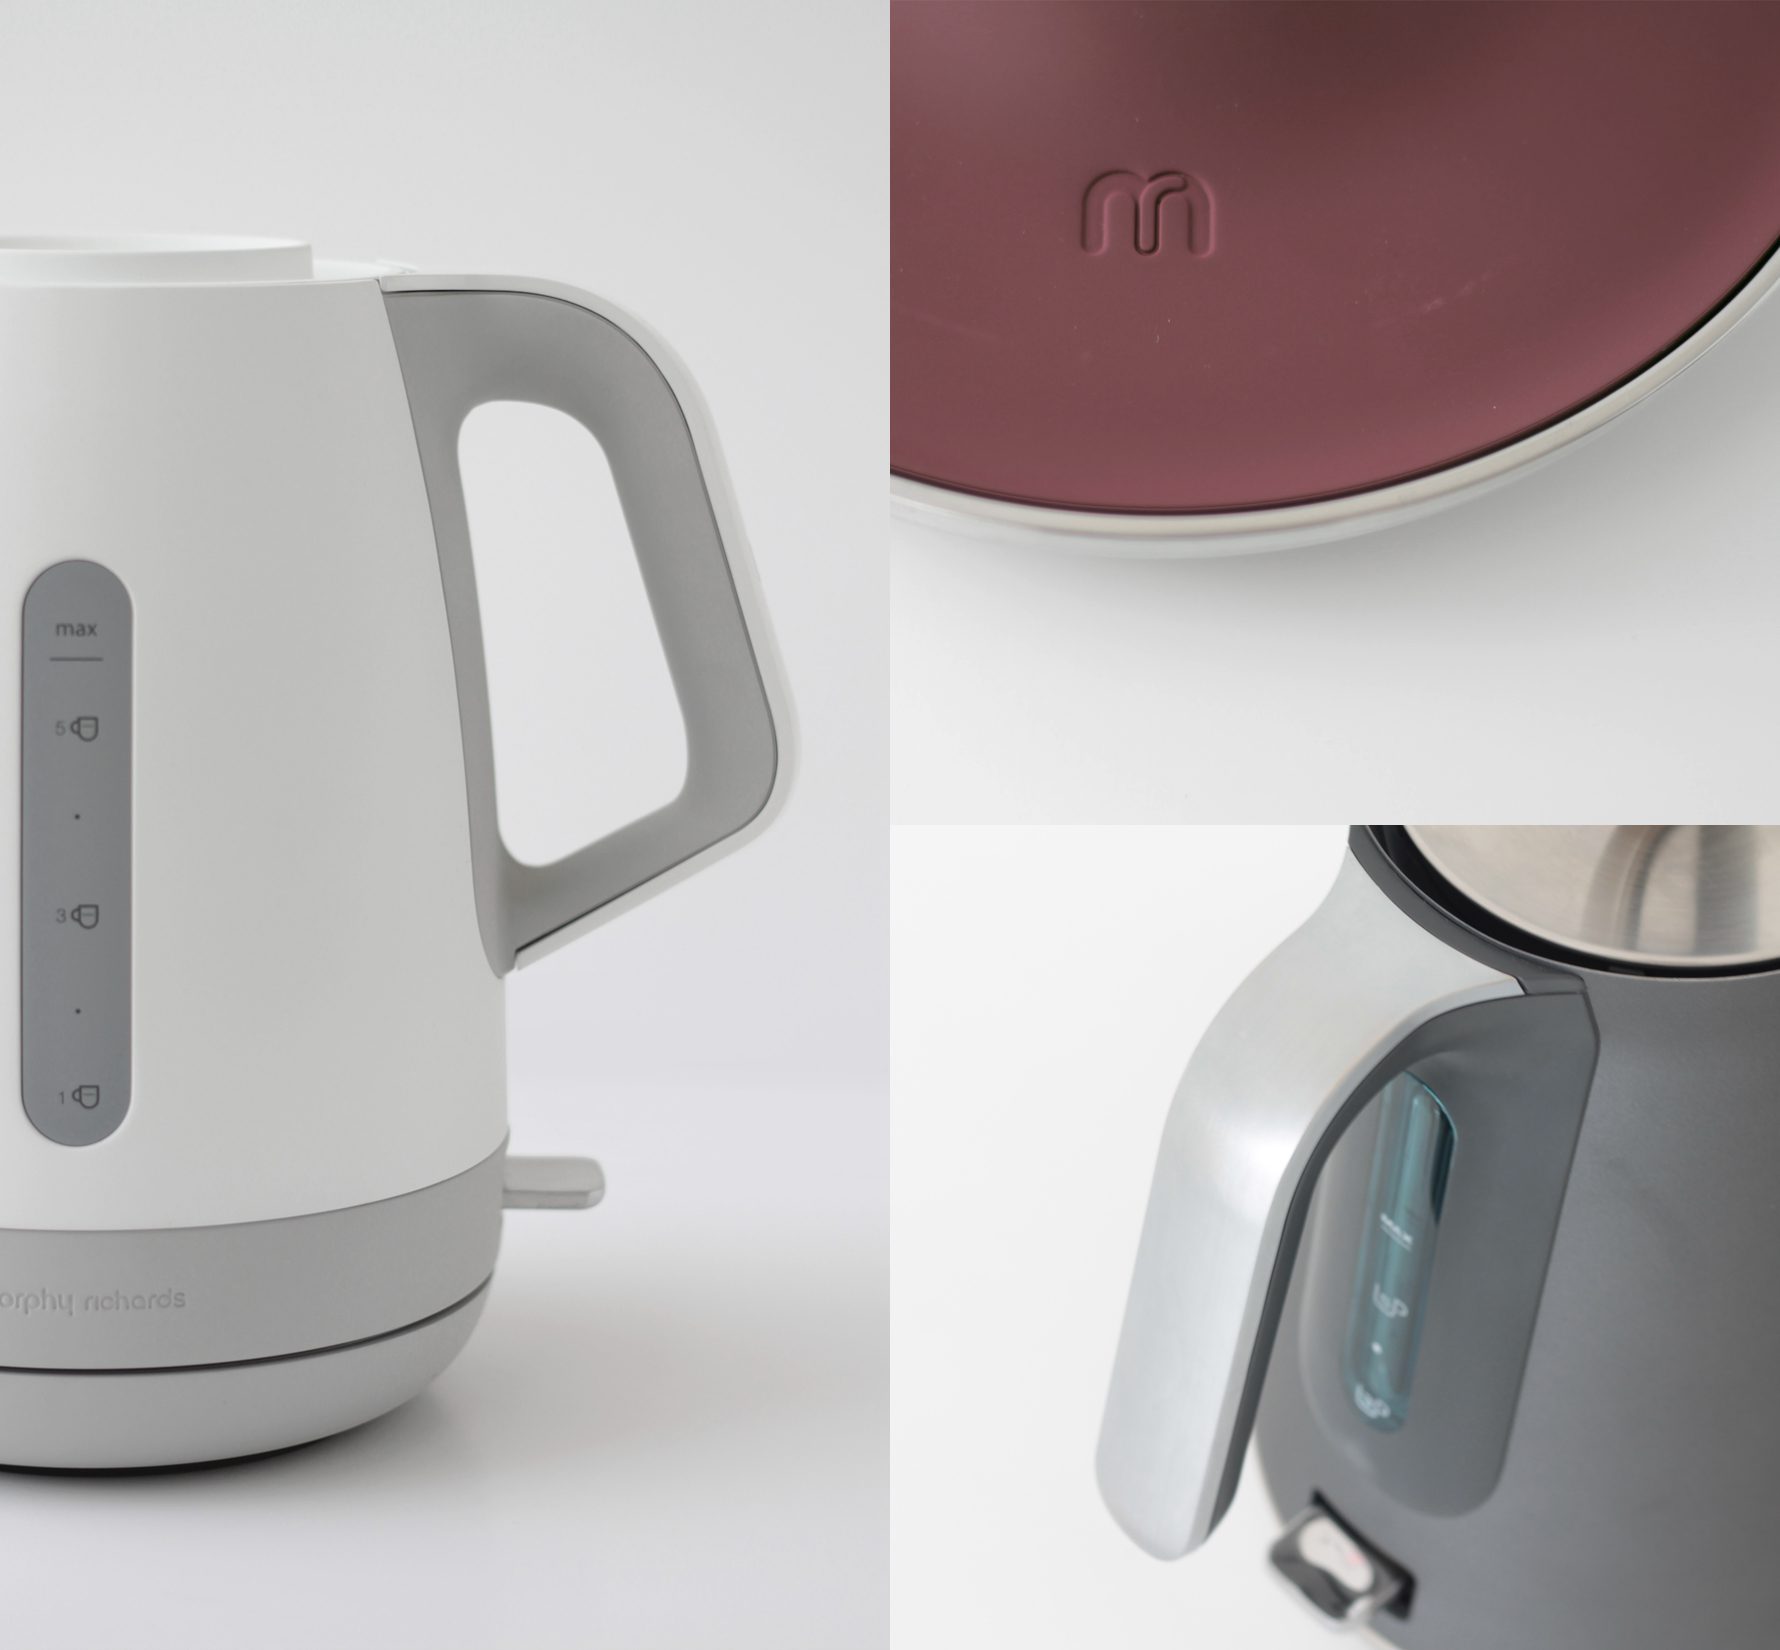 Just a few examples of the product brand language we designed for UK small appliance brand Morphy Richards.